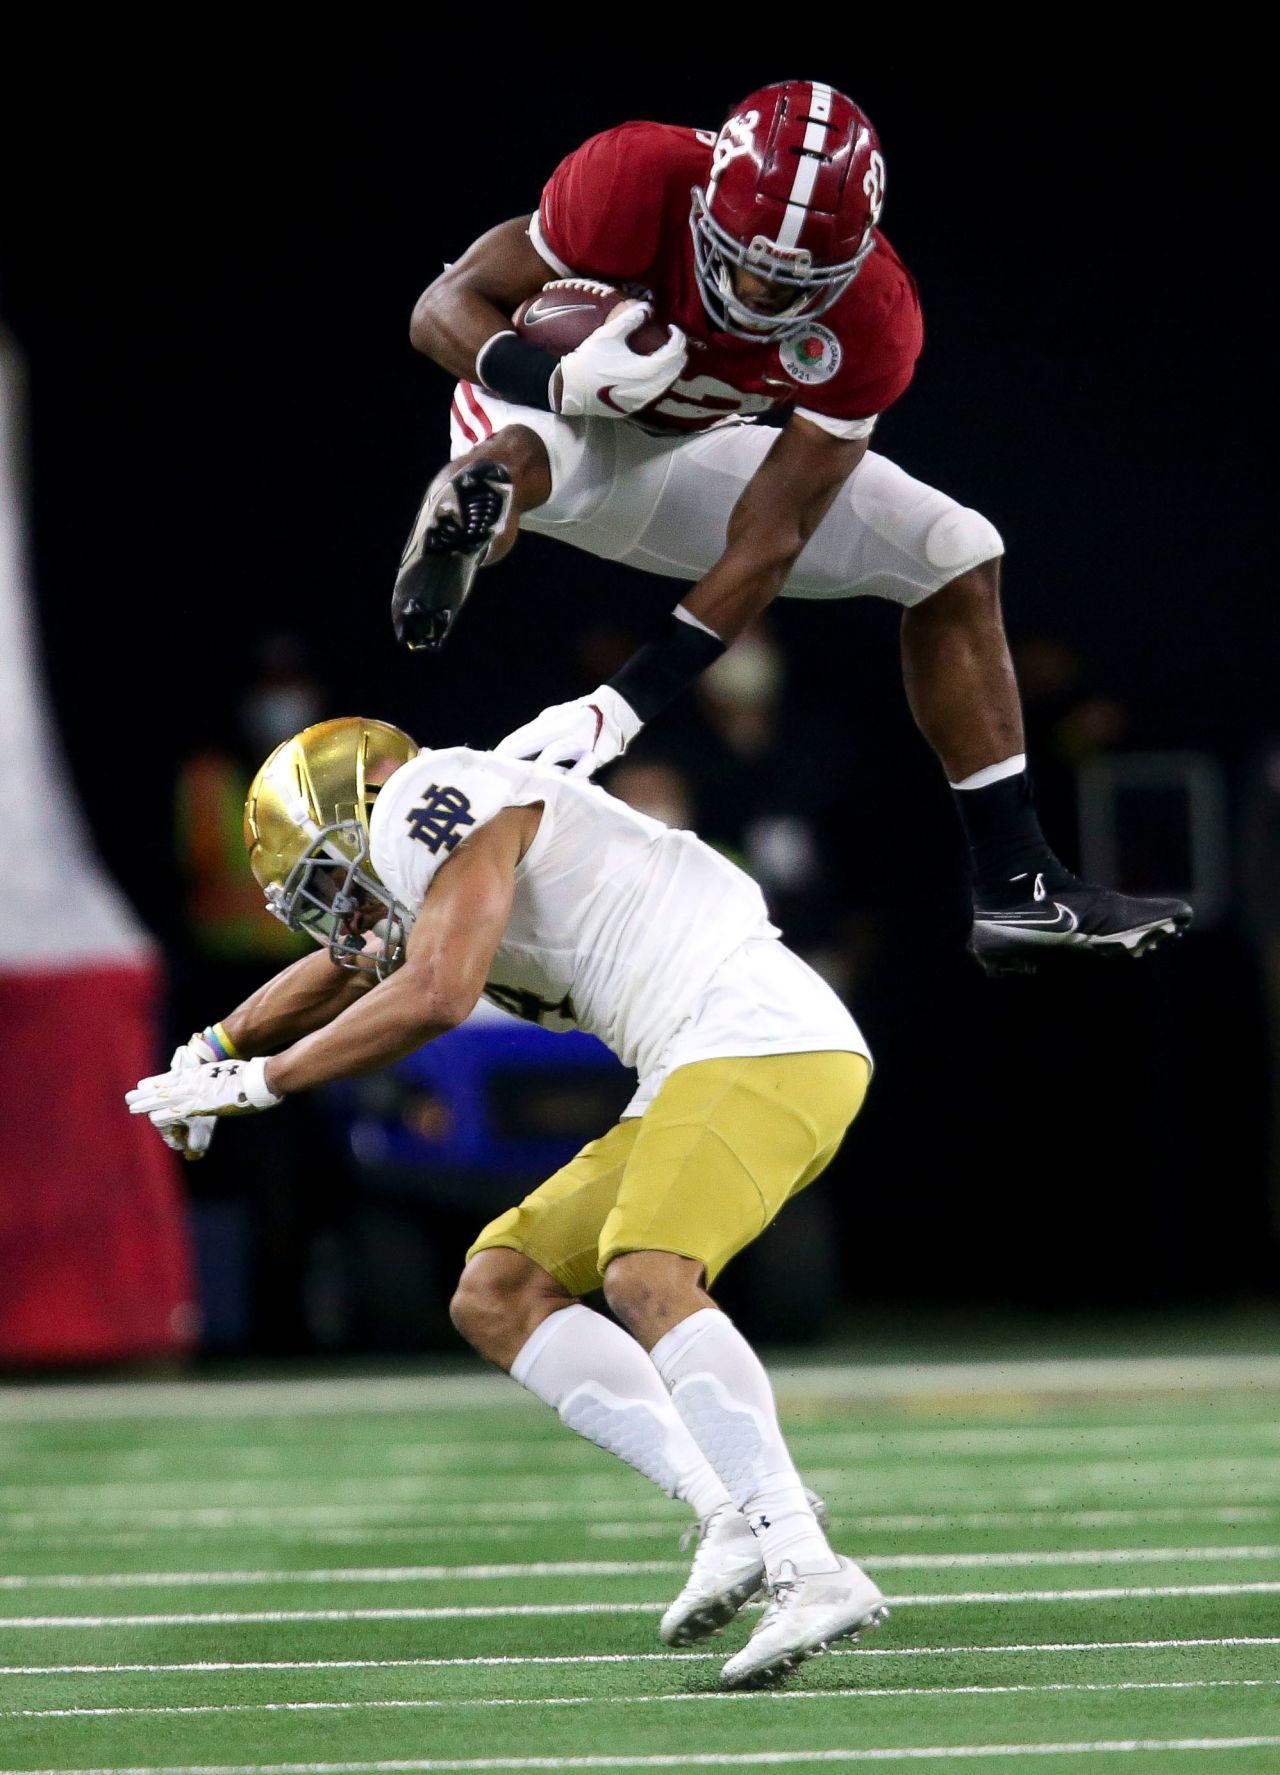 Alabama running back Najee Harris <a href="https://www.cnn.com/2021/01/01/us/najee-harris-megan-rapinoe-hurdle-spt-trnd/index.html" target="_blank">hurdles Notre Dame cornerback Nick McCloud </a>during a College Football Playoff semifinal on Friday, January 1. Alabama won 31-14 to book a spot in the title game.